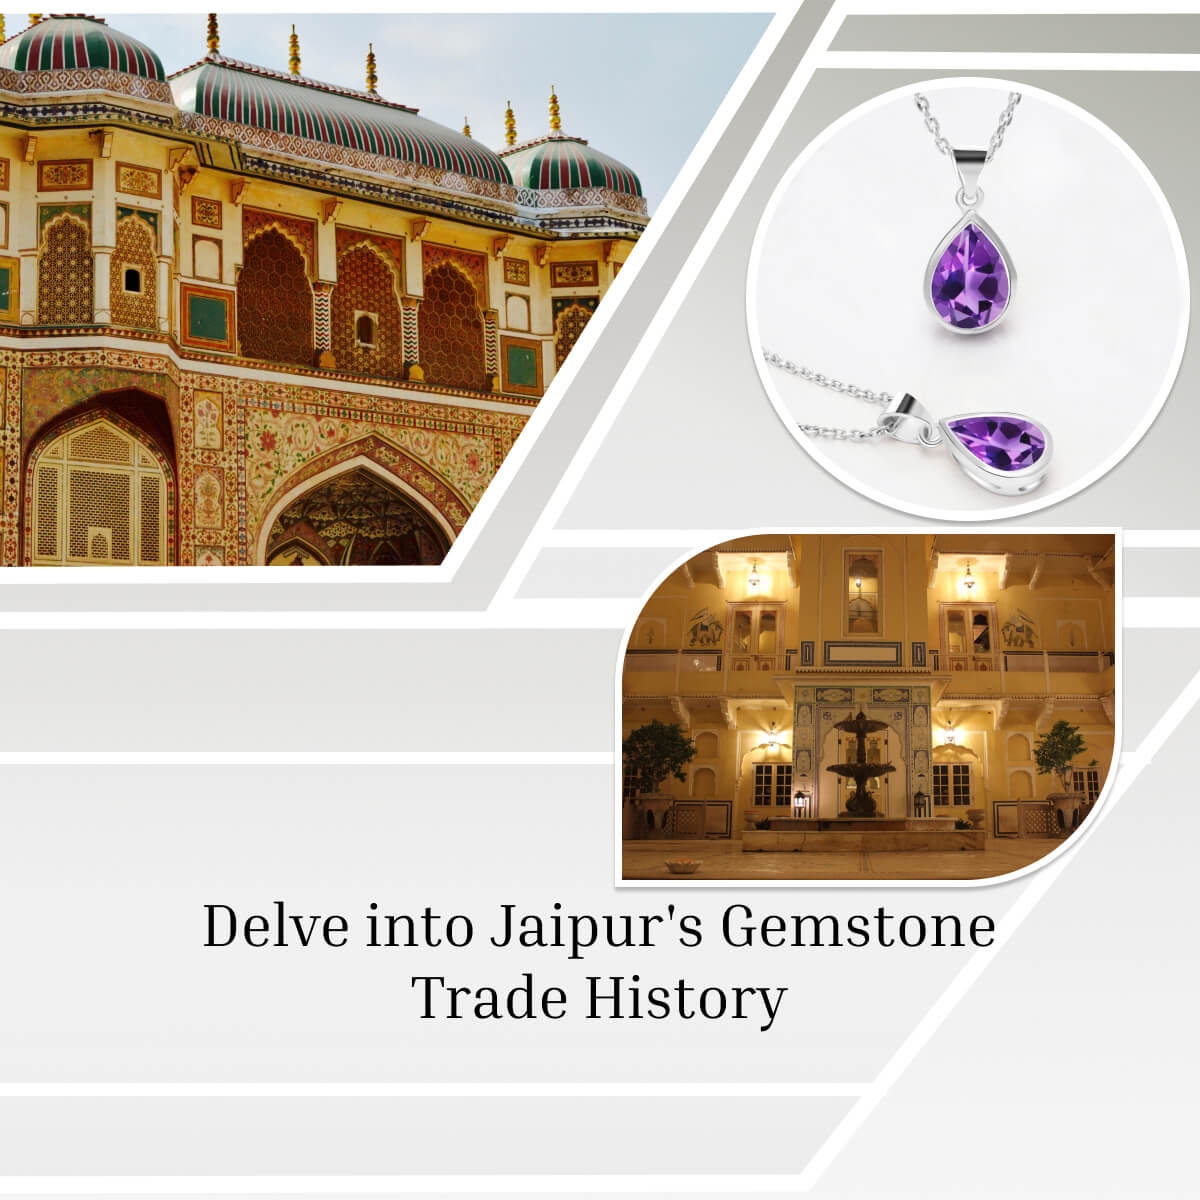 History of Jaipur Silver and Gemstone Trade